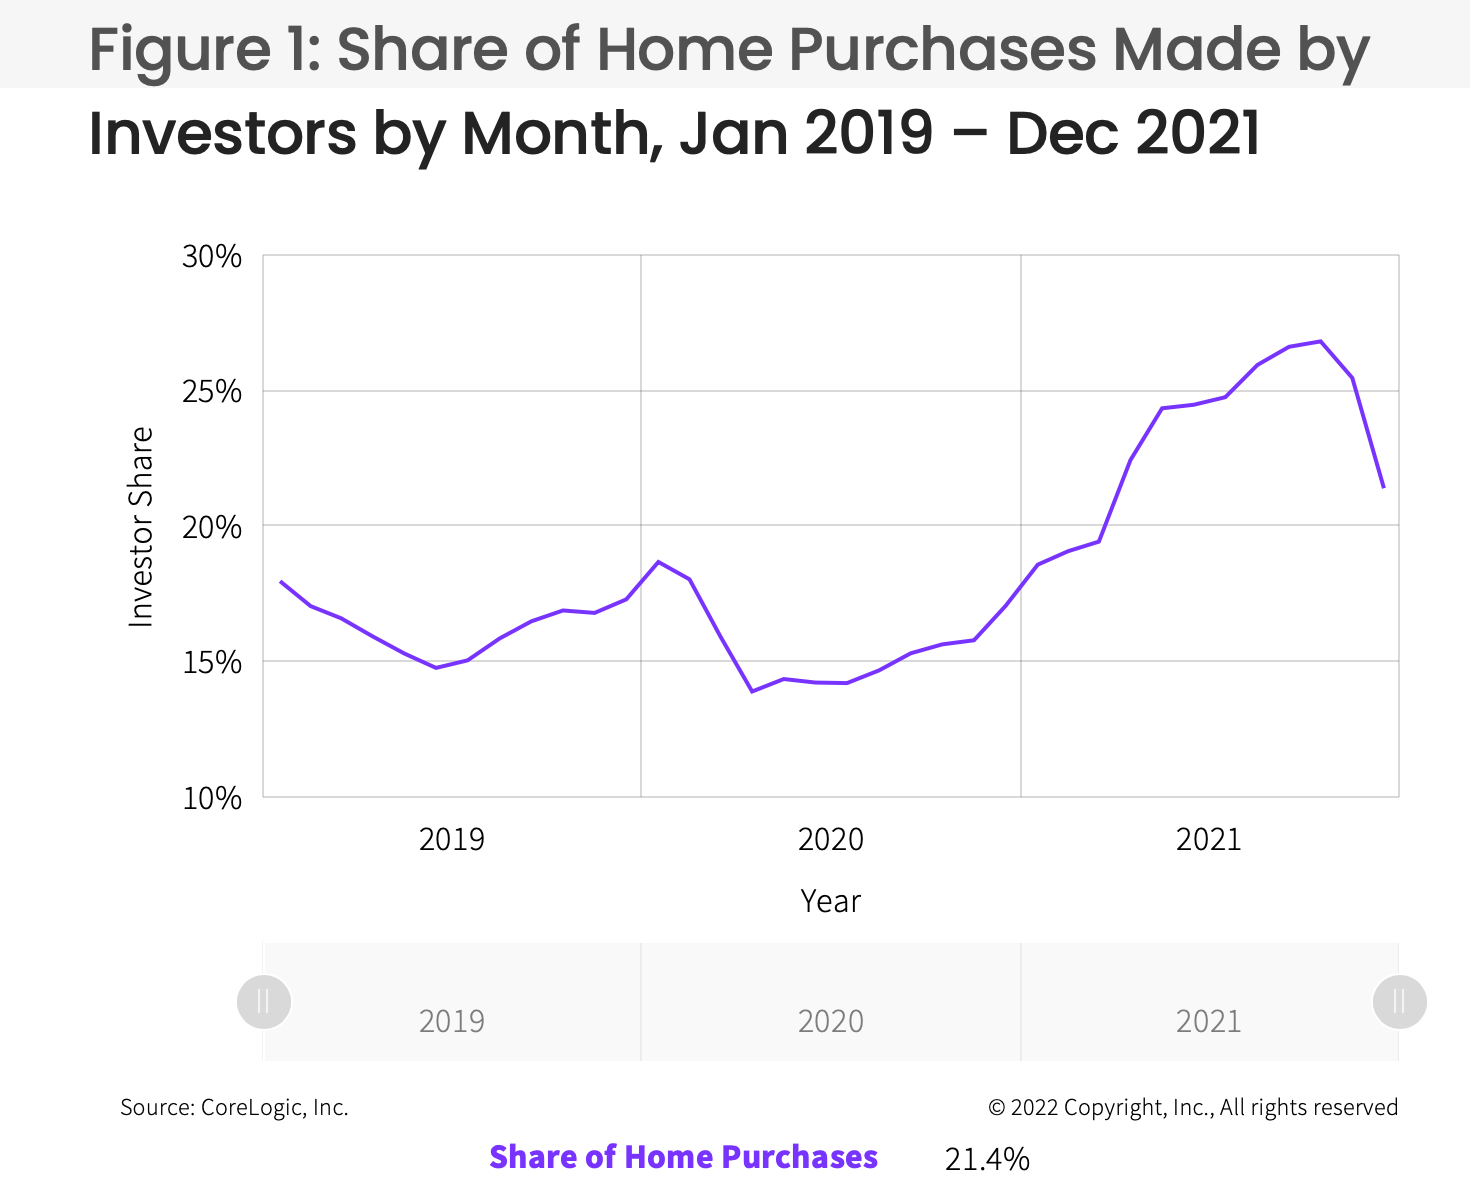 A line graph charting the share of home purchases made by investors from January 2019 to December 2021.